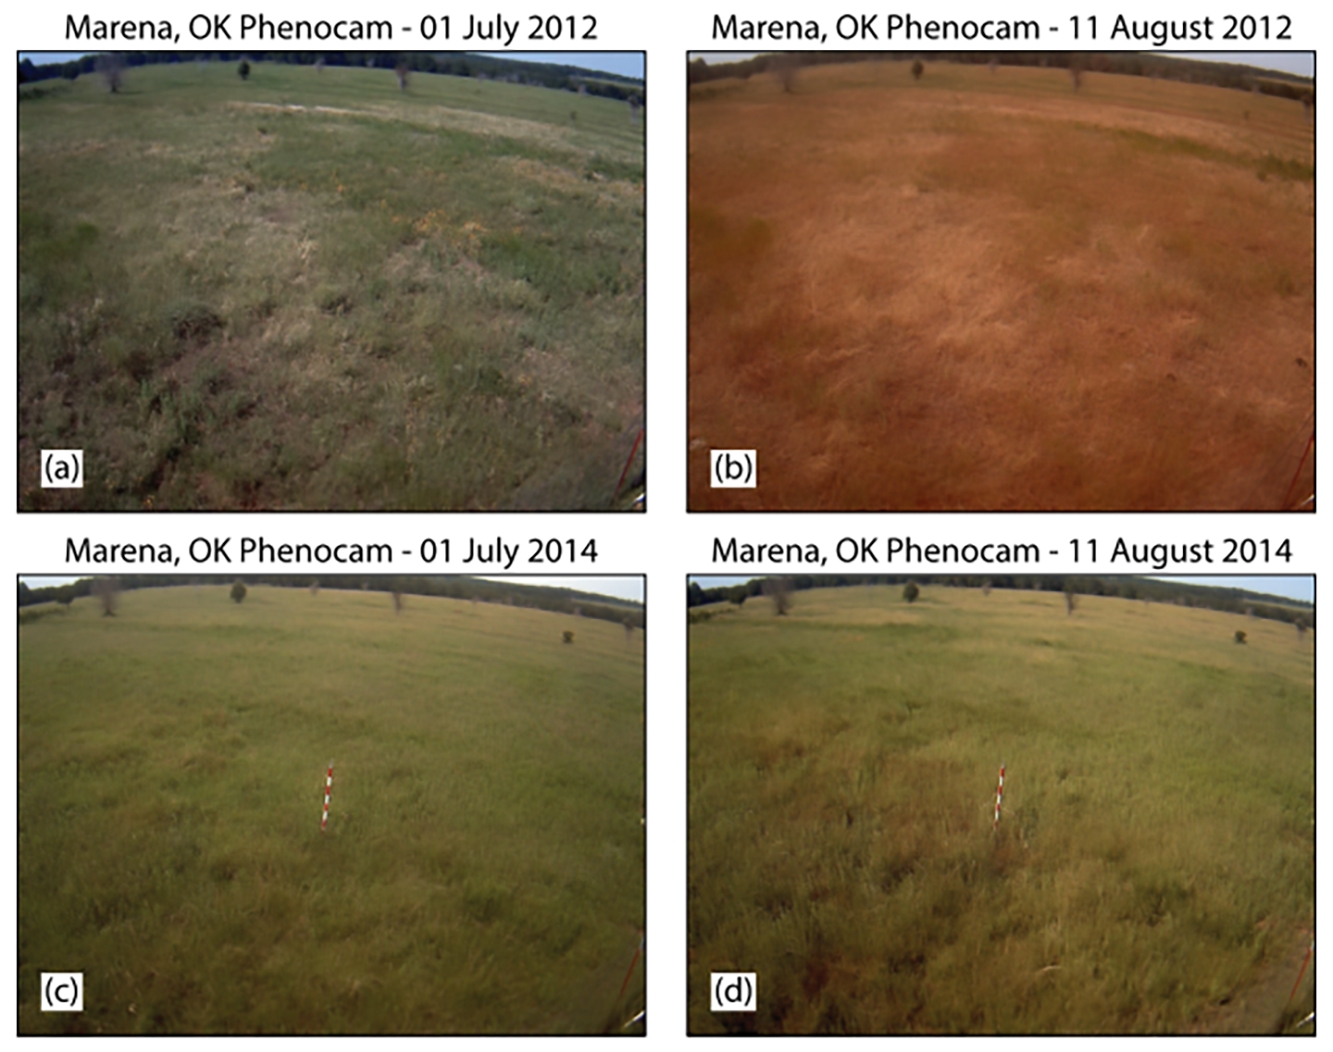 A figure showing the impact of a flash drought on a grassland in Oklahoma. The photos on the top row show the impact of the flash drought on the ecosystem compared with photos of the same area without flash drought impacts (bottom row).